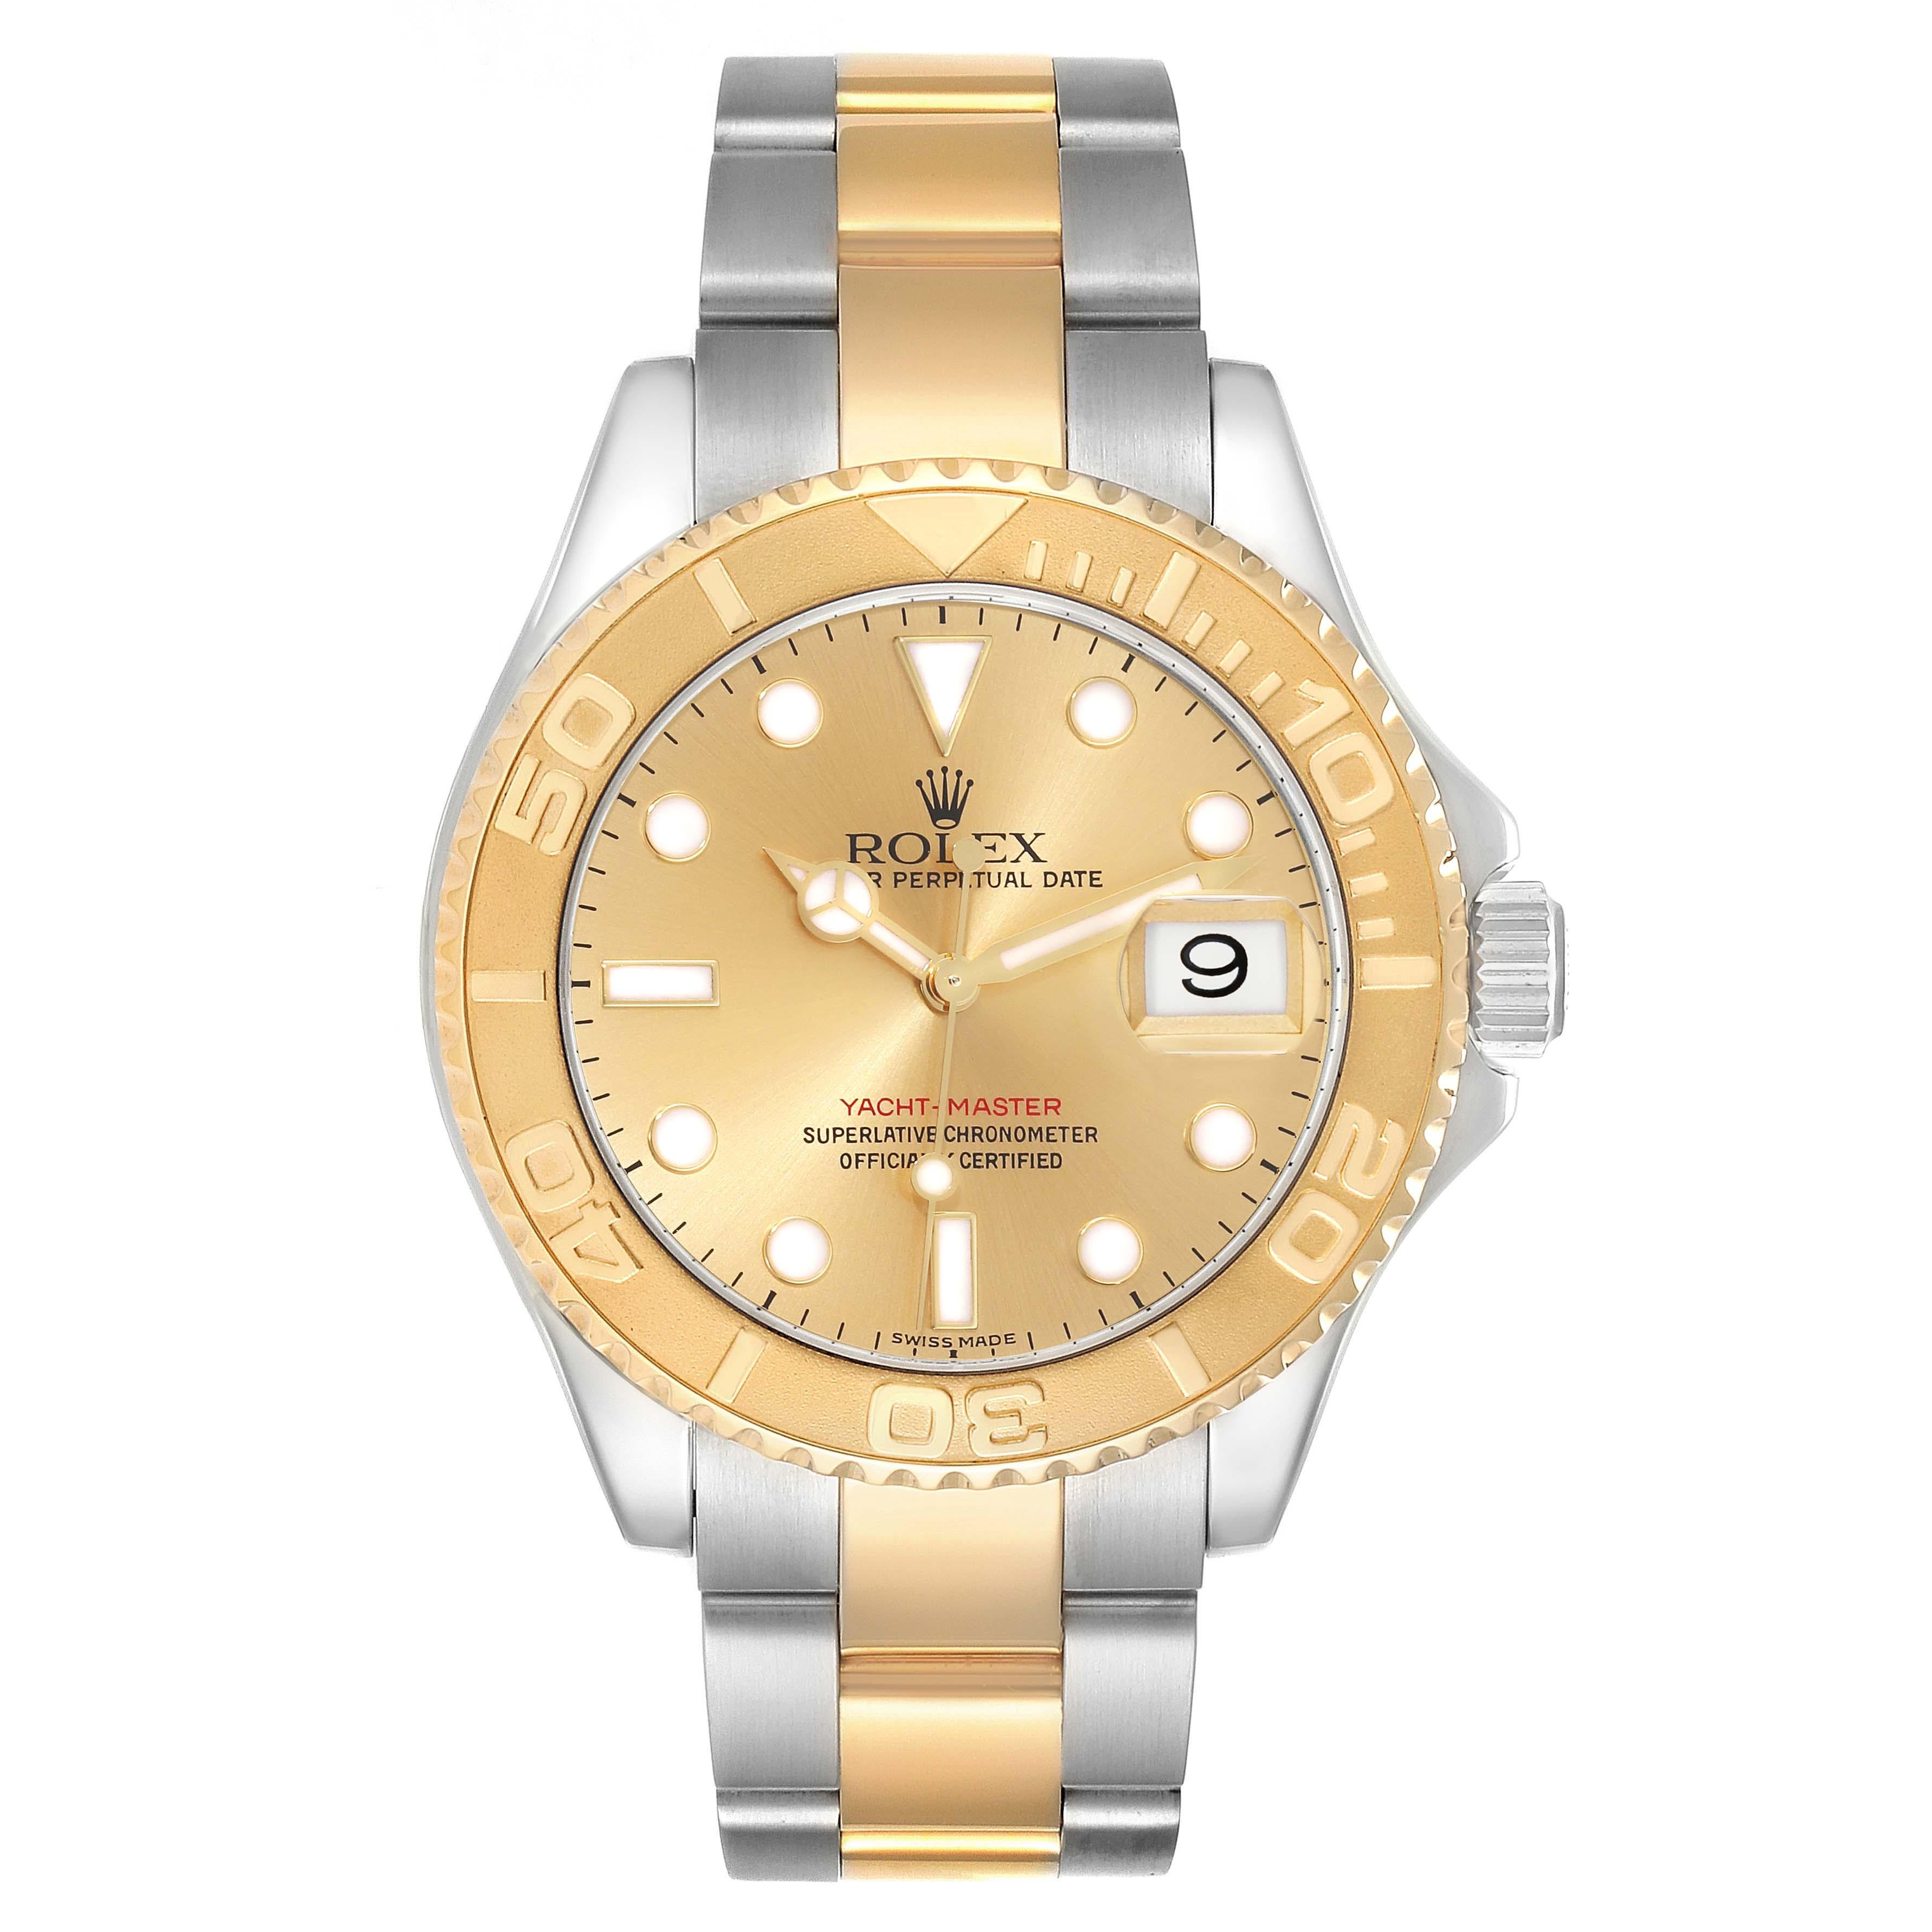 Rolex Yachtmaster Steel Yellow Gold Champagne Dial Mens Watch 16623. Officially certified chronometer self-winding movement. Stainless steel case 40 mm in diameter. Rolex logo on a crown. 18k yellow gold special time-lapse bidirectional rotating